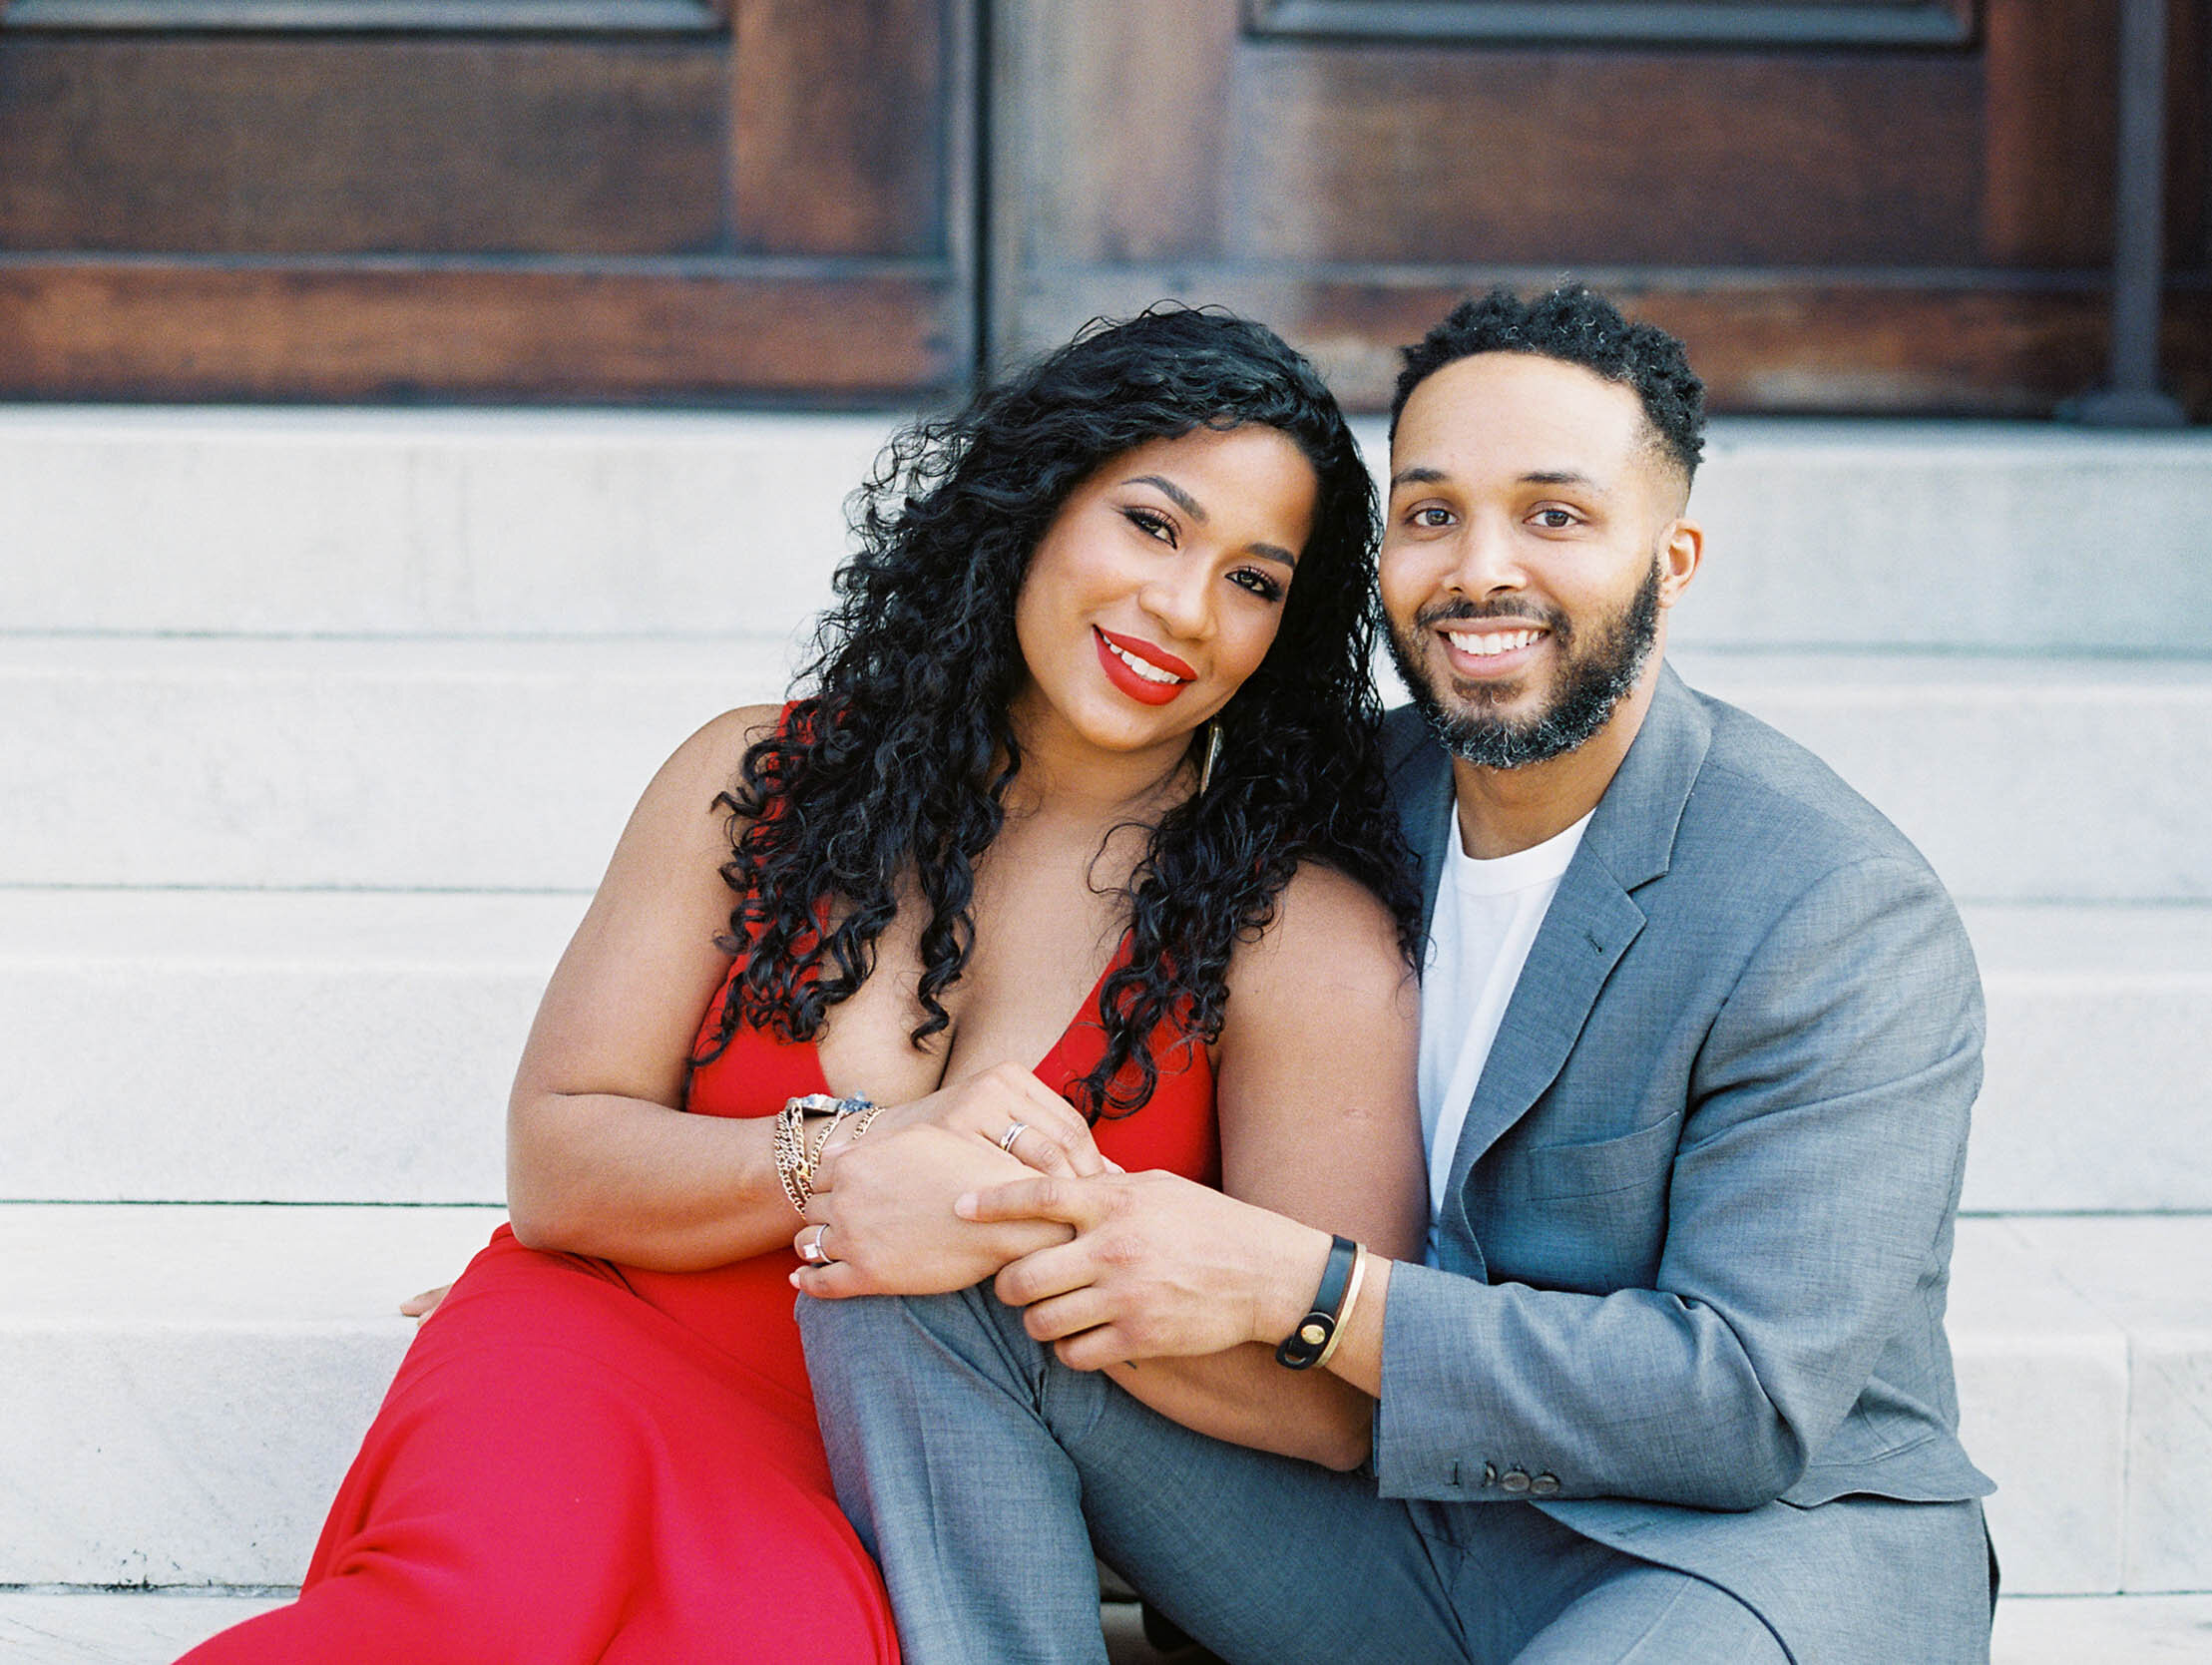 Engagement session and dancing in the park in the Baltimore neighborhood of Mount Vernon